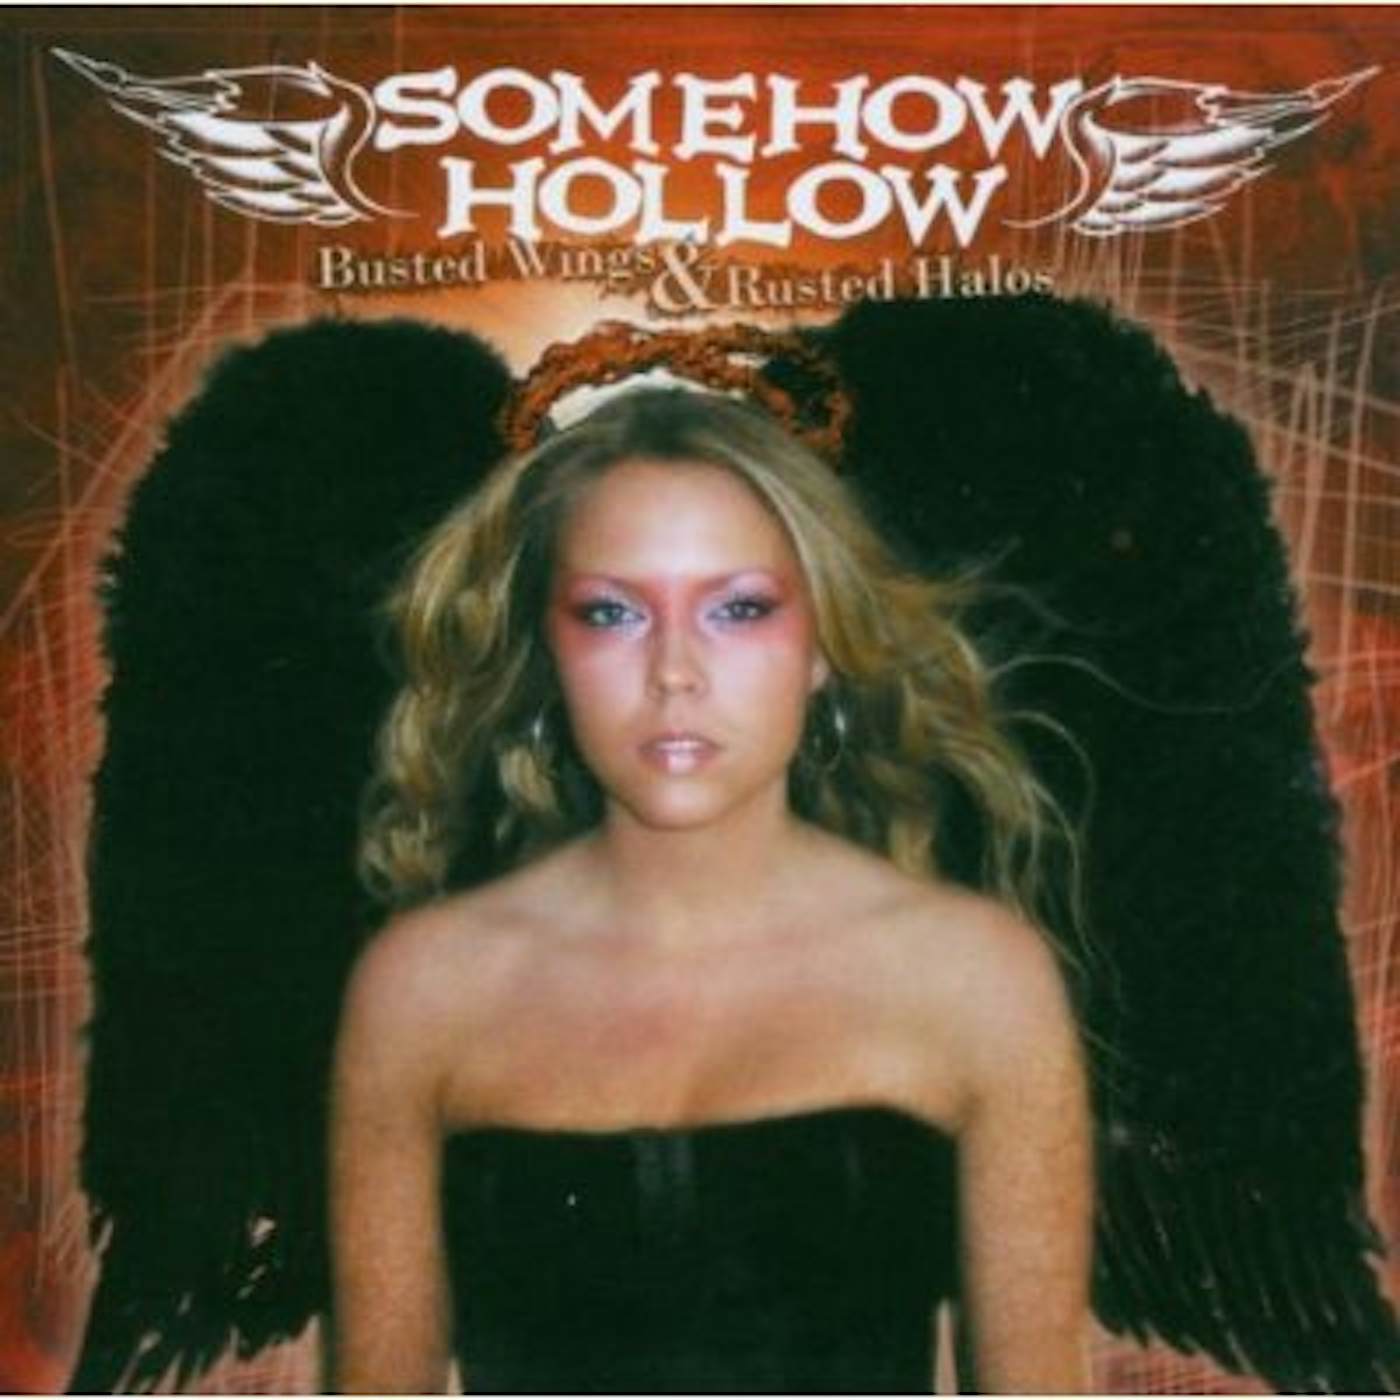 Somehow Hollow BUSTED WINGS & RUSTED HALOS CD